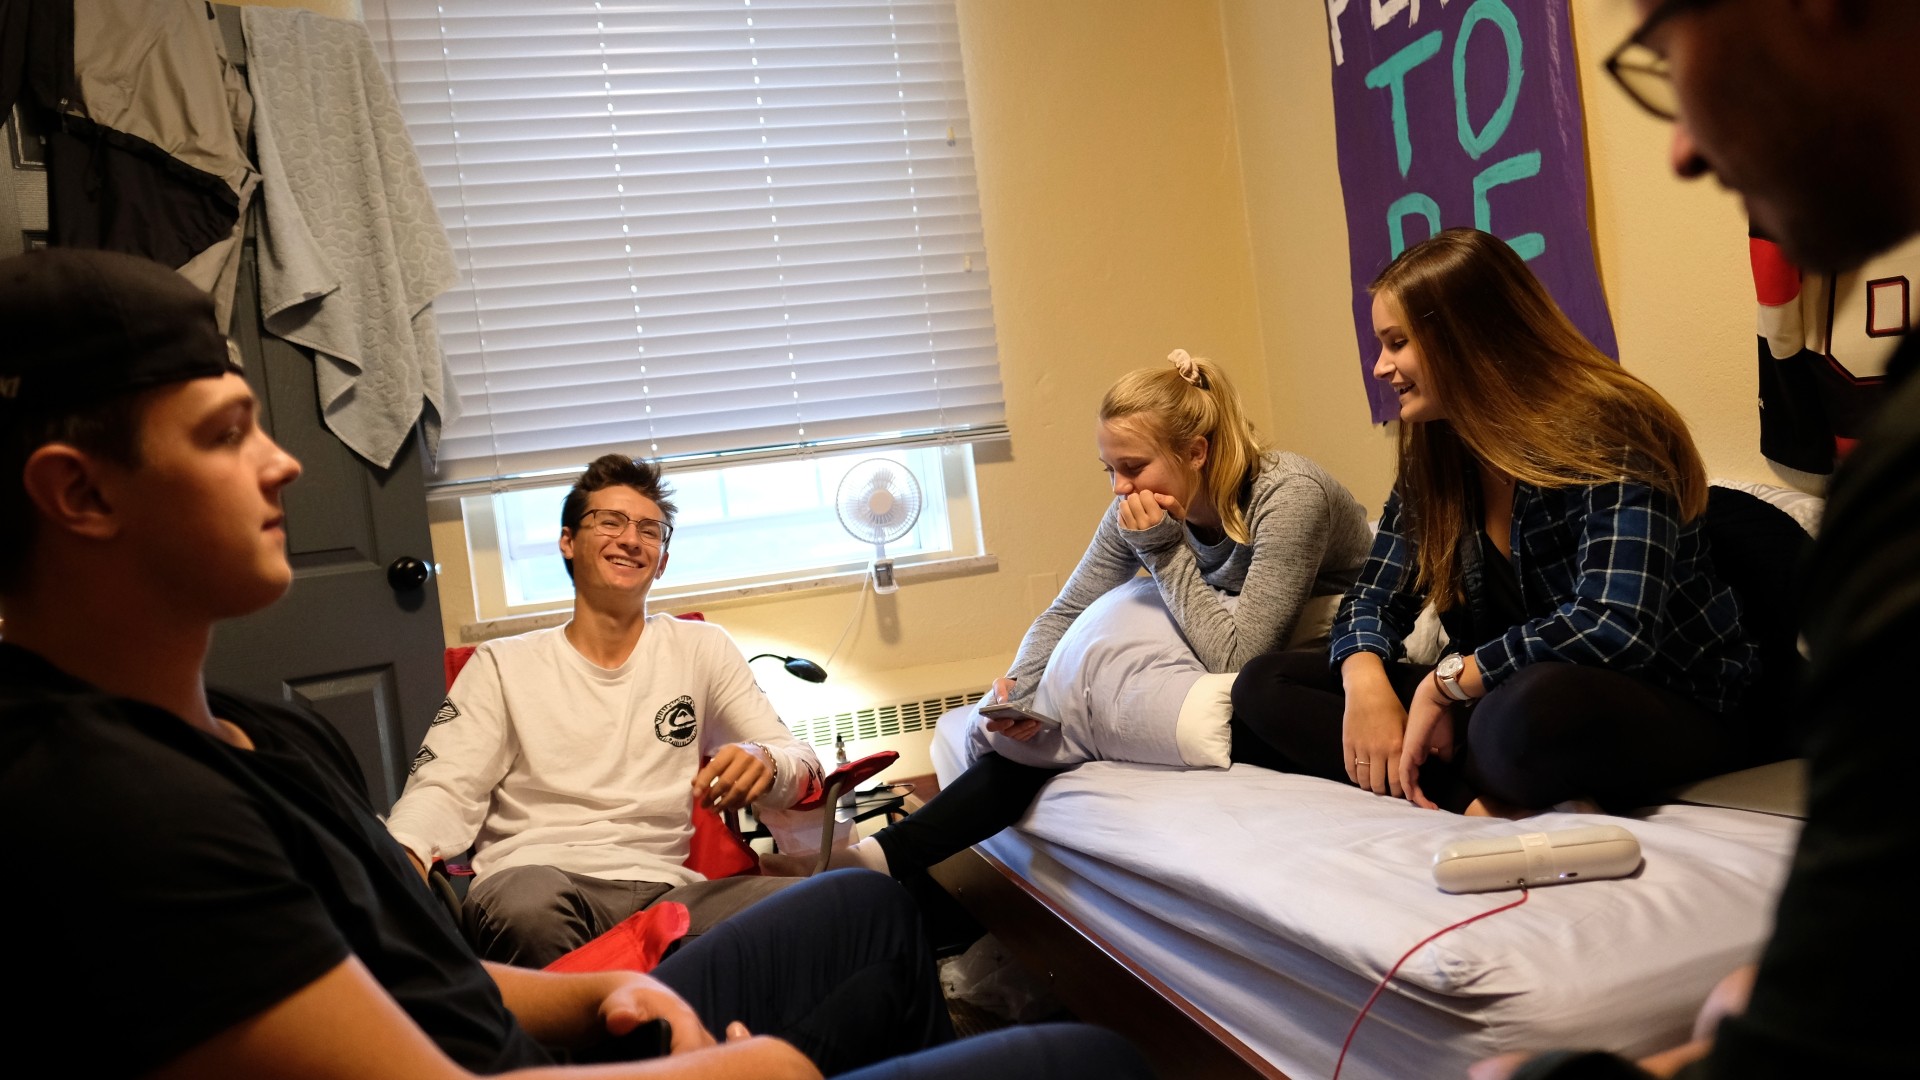 Students socializing in a residence room. Two students are sitting on the bed, while the others are sitting on chairs.